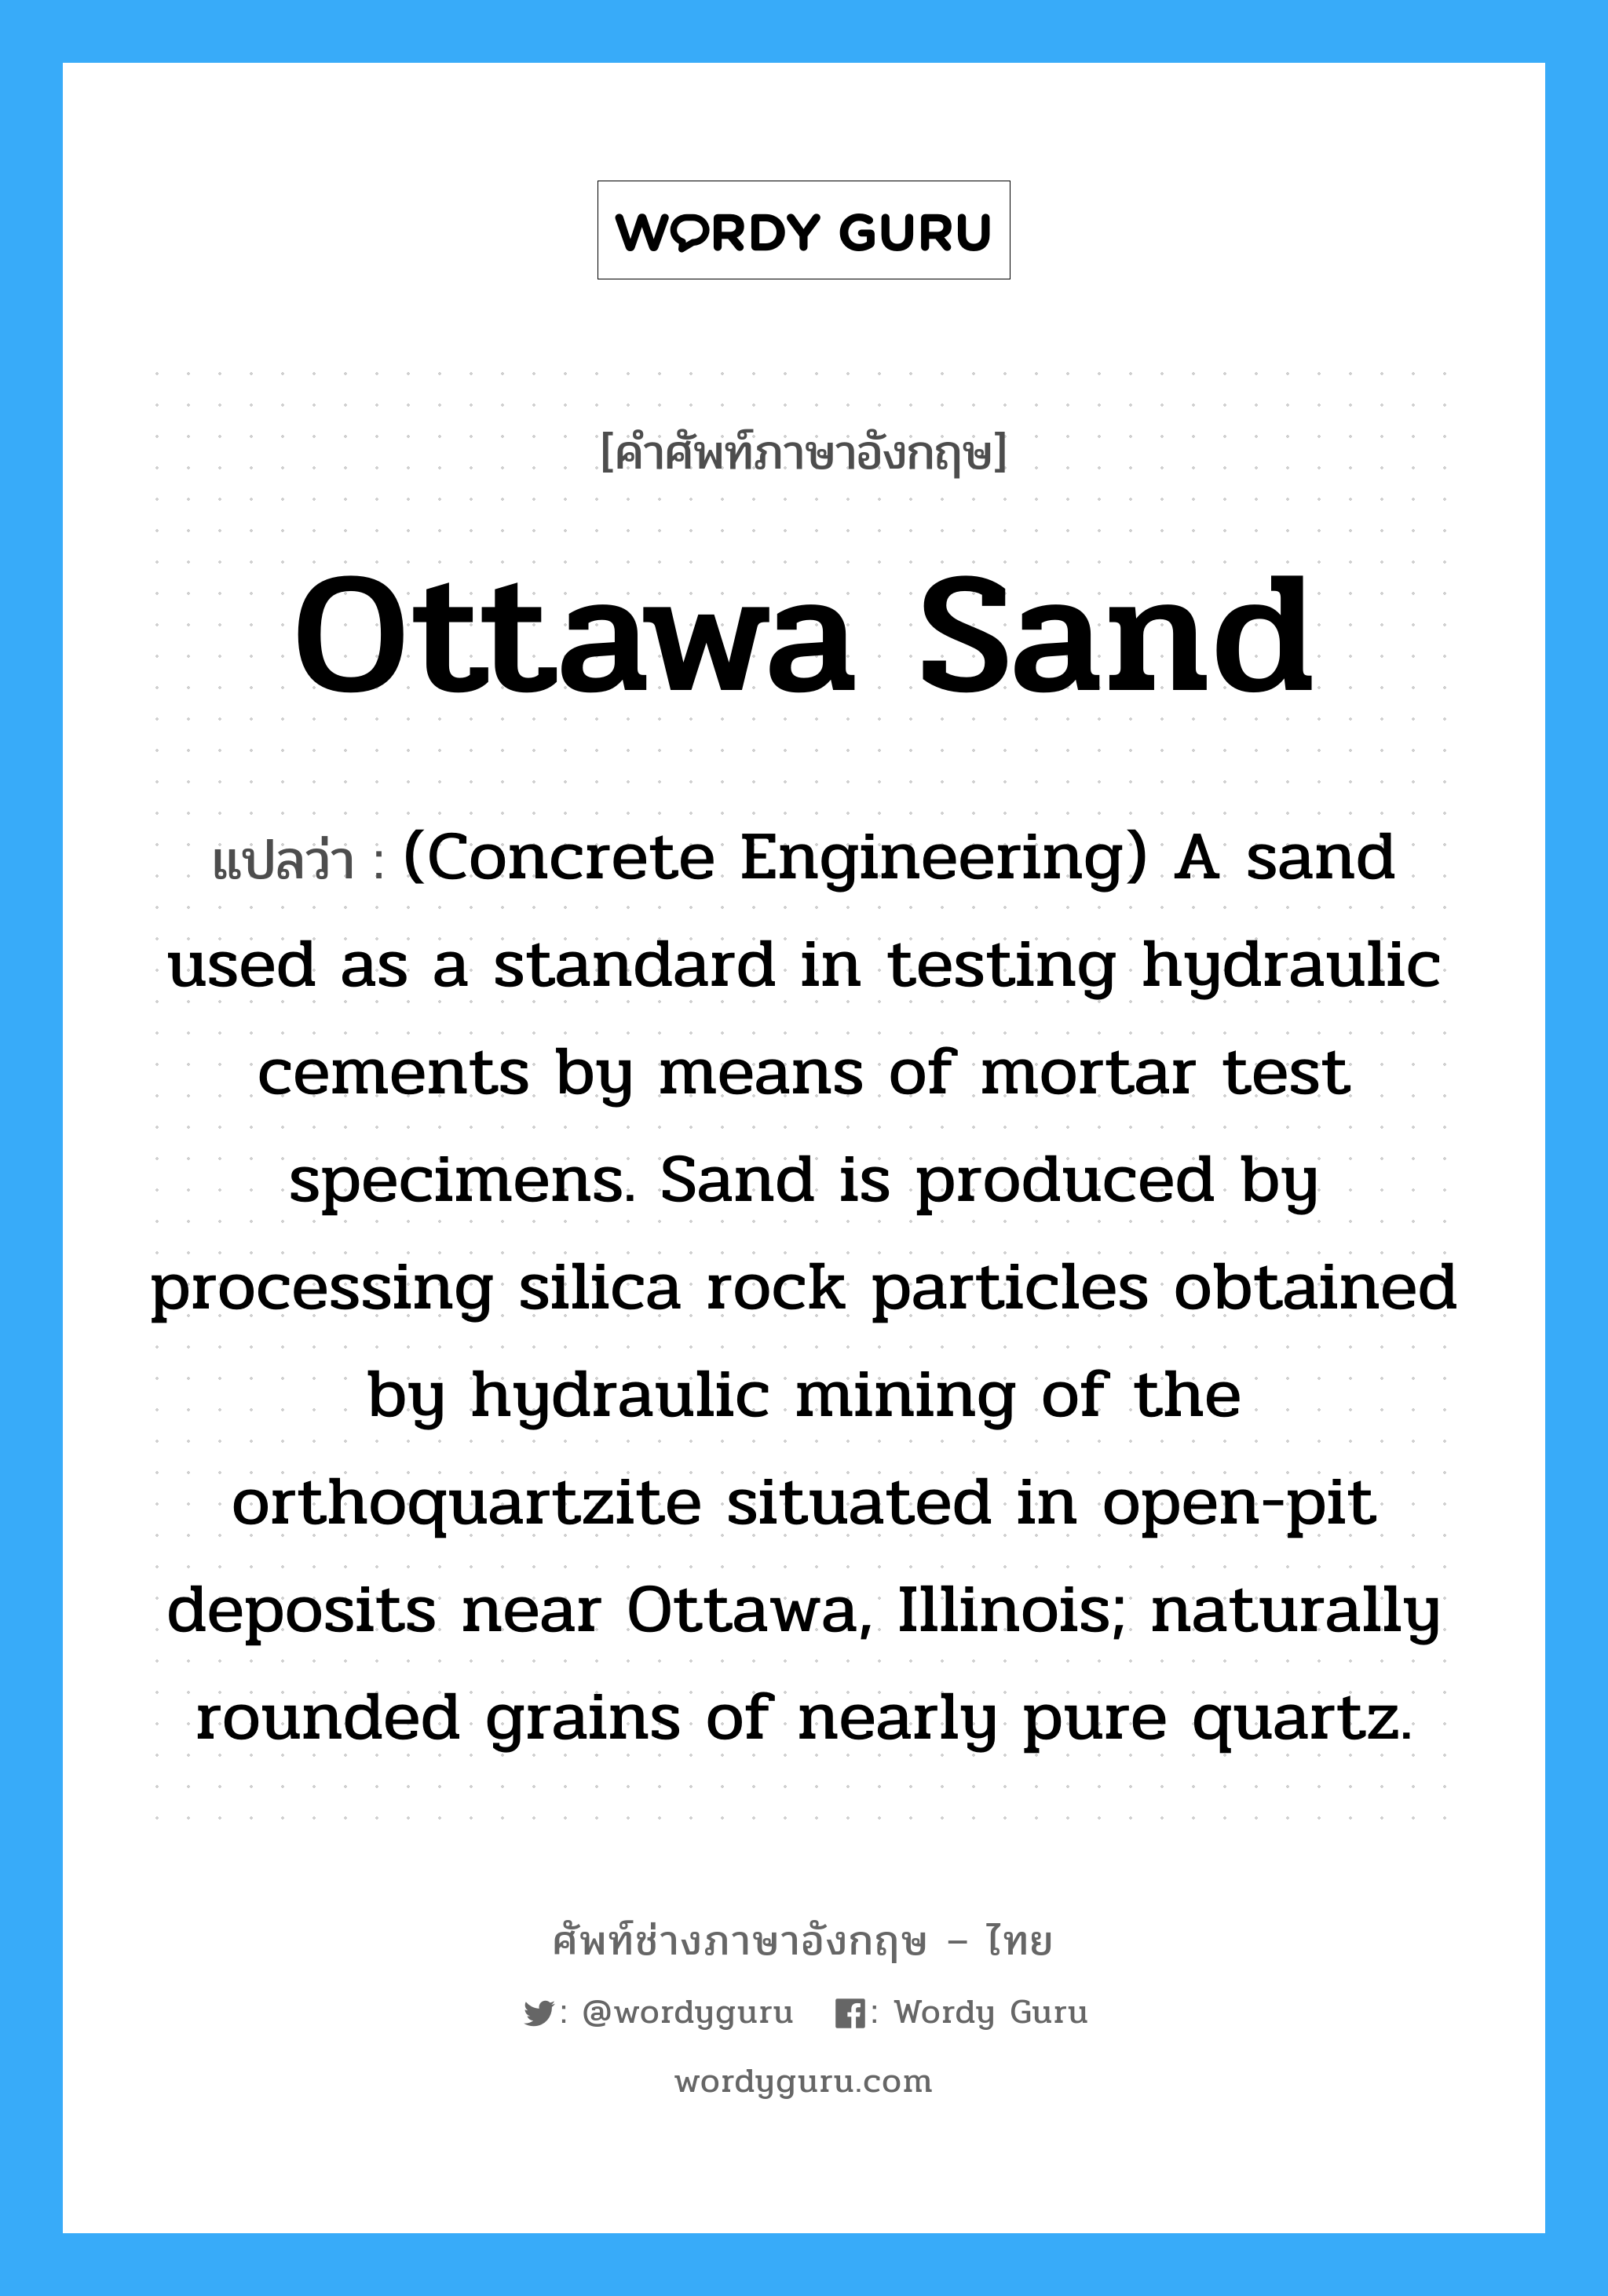 (Concrete Engineering) A sand used as a standard in testing hydraulic cements by means of mortar test specimens. Sand is produced by processing silica rock particles obtained by hydraulic mining of the orthoquartzite situated in open-pit deposits near Ottawa, Illinois; naturally rounded grains of nearly pure quartz. ภาษาอังกฤษ?, คำศัพท์ช่างภาษาอังกฤษ - ไทย (Concrete Engineering) A sand used as a standard in testing hydraulic cements by means of mortar test specimens. Sand is produced by processing silica rock particles obtained by hydraulic mining of the orthoquartzite situated in open-pit deposits near Ottawa, Illinois; naturally rounded grains of nearly pure quartz. คำศัพท์ภาษาอังกฤษ (Concrete Engineering) A sand used as a standard in testing hydraulic cements by means of mortar test specimens. Sand is produced by processing silica rock particles obtained by hydraulic mining of the orthoquartzite situated in open-pit deposits near Ottawa, Illinois; naturally rounded grains of nearly pure quartz. แปลว่า Ottawa Sand